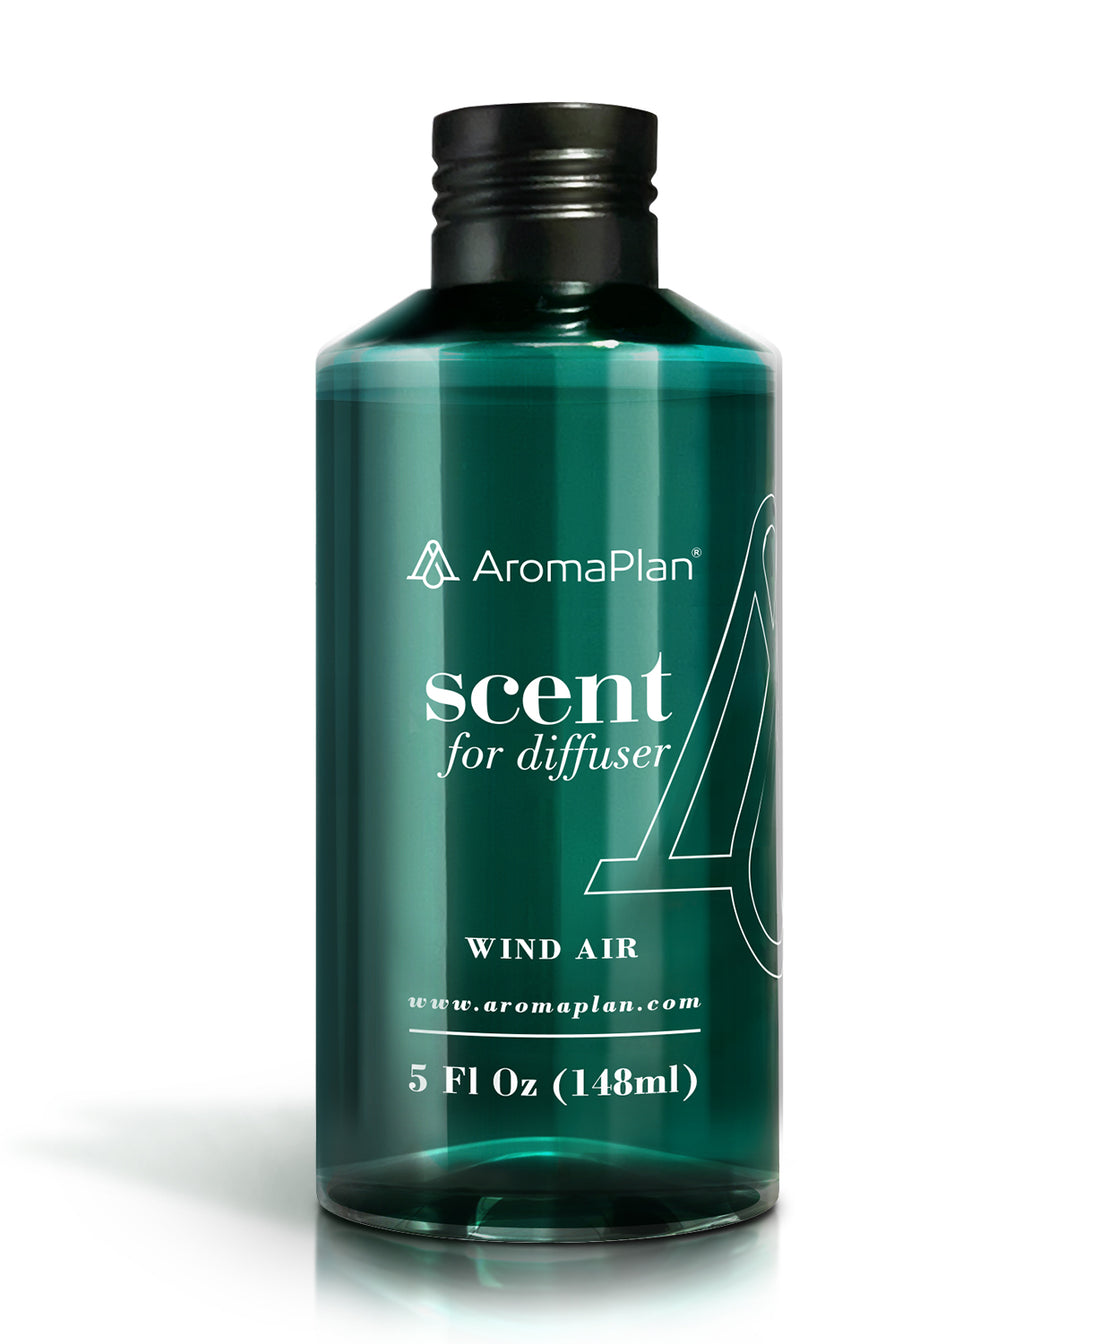 Discover the Scent Wind Air essence is inspired by &quot;Osklen Brazil&quot;. Fragrance - Aroma Oil for Scent Diffusers - Natural &amp; Vegan - Essential Oil Blends for Diffuser - Size: 5 Fl Oz. (148ml)